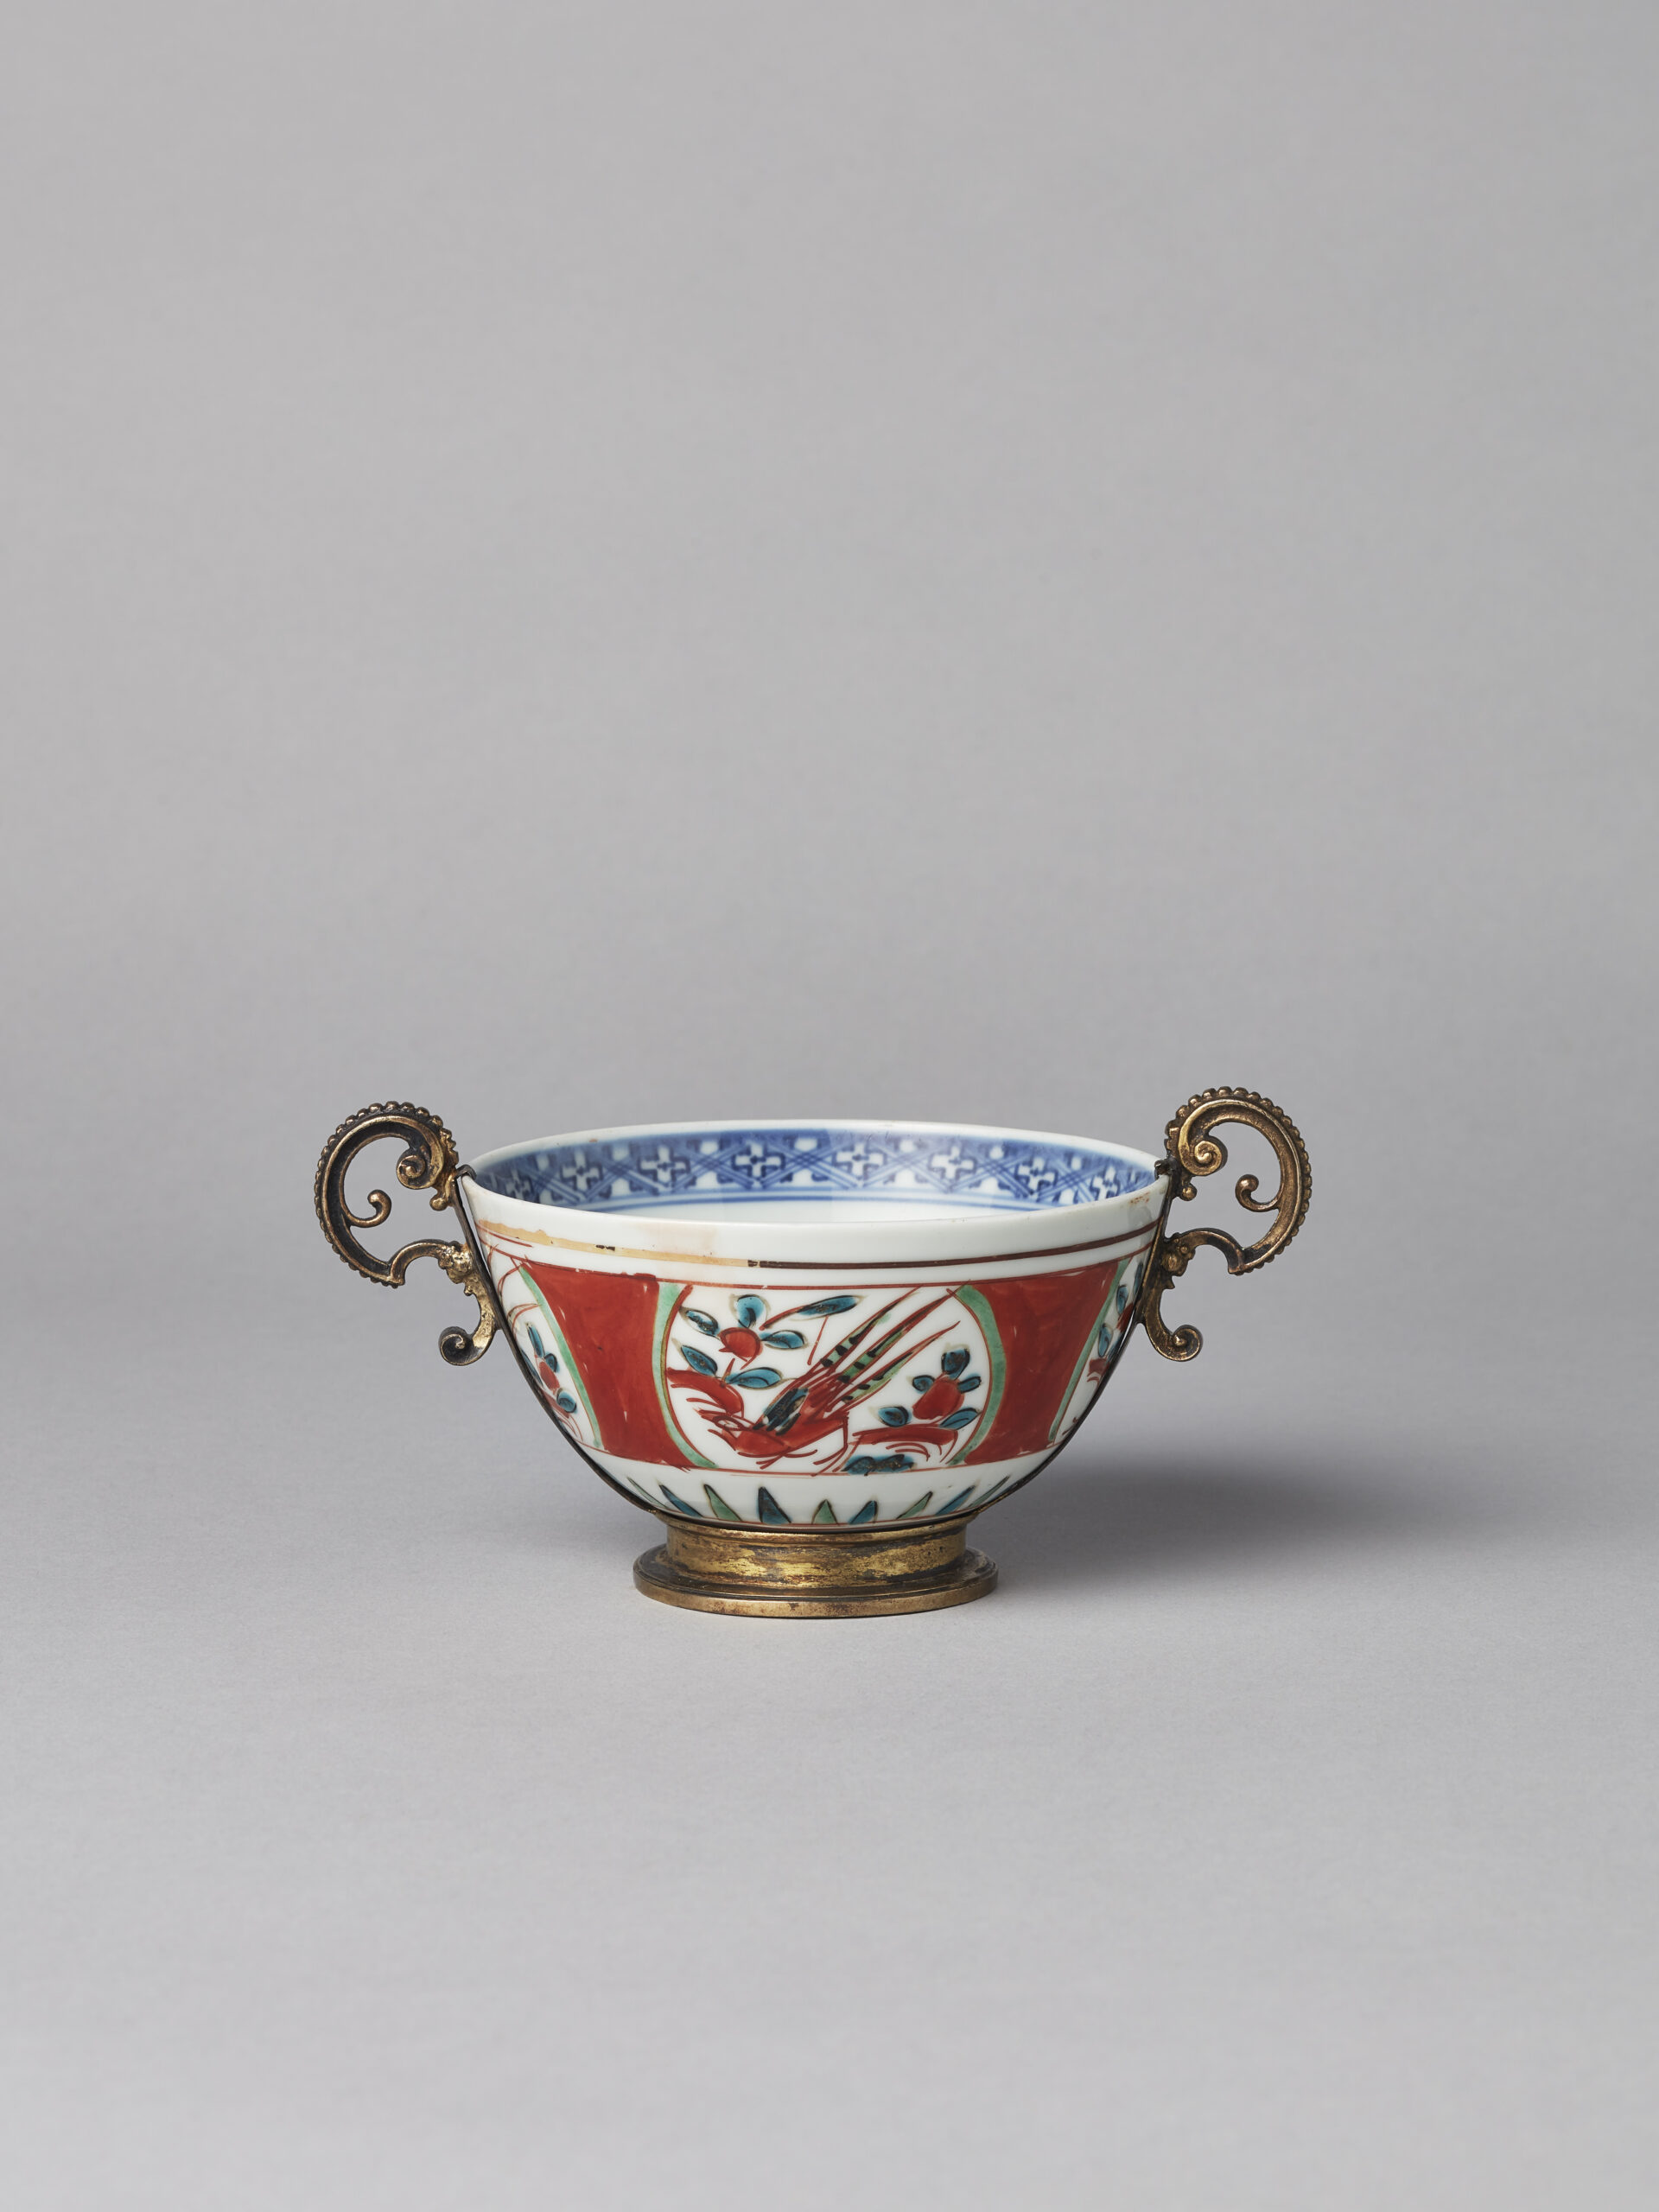 A rare and important ‘wucai’ bowl with silver-gilt mounts (Ming dynasty, Jiajing period 1522-1566)